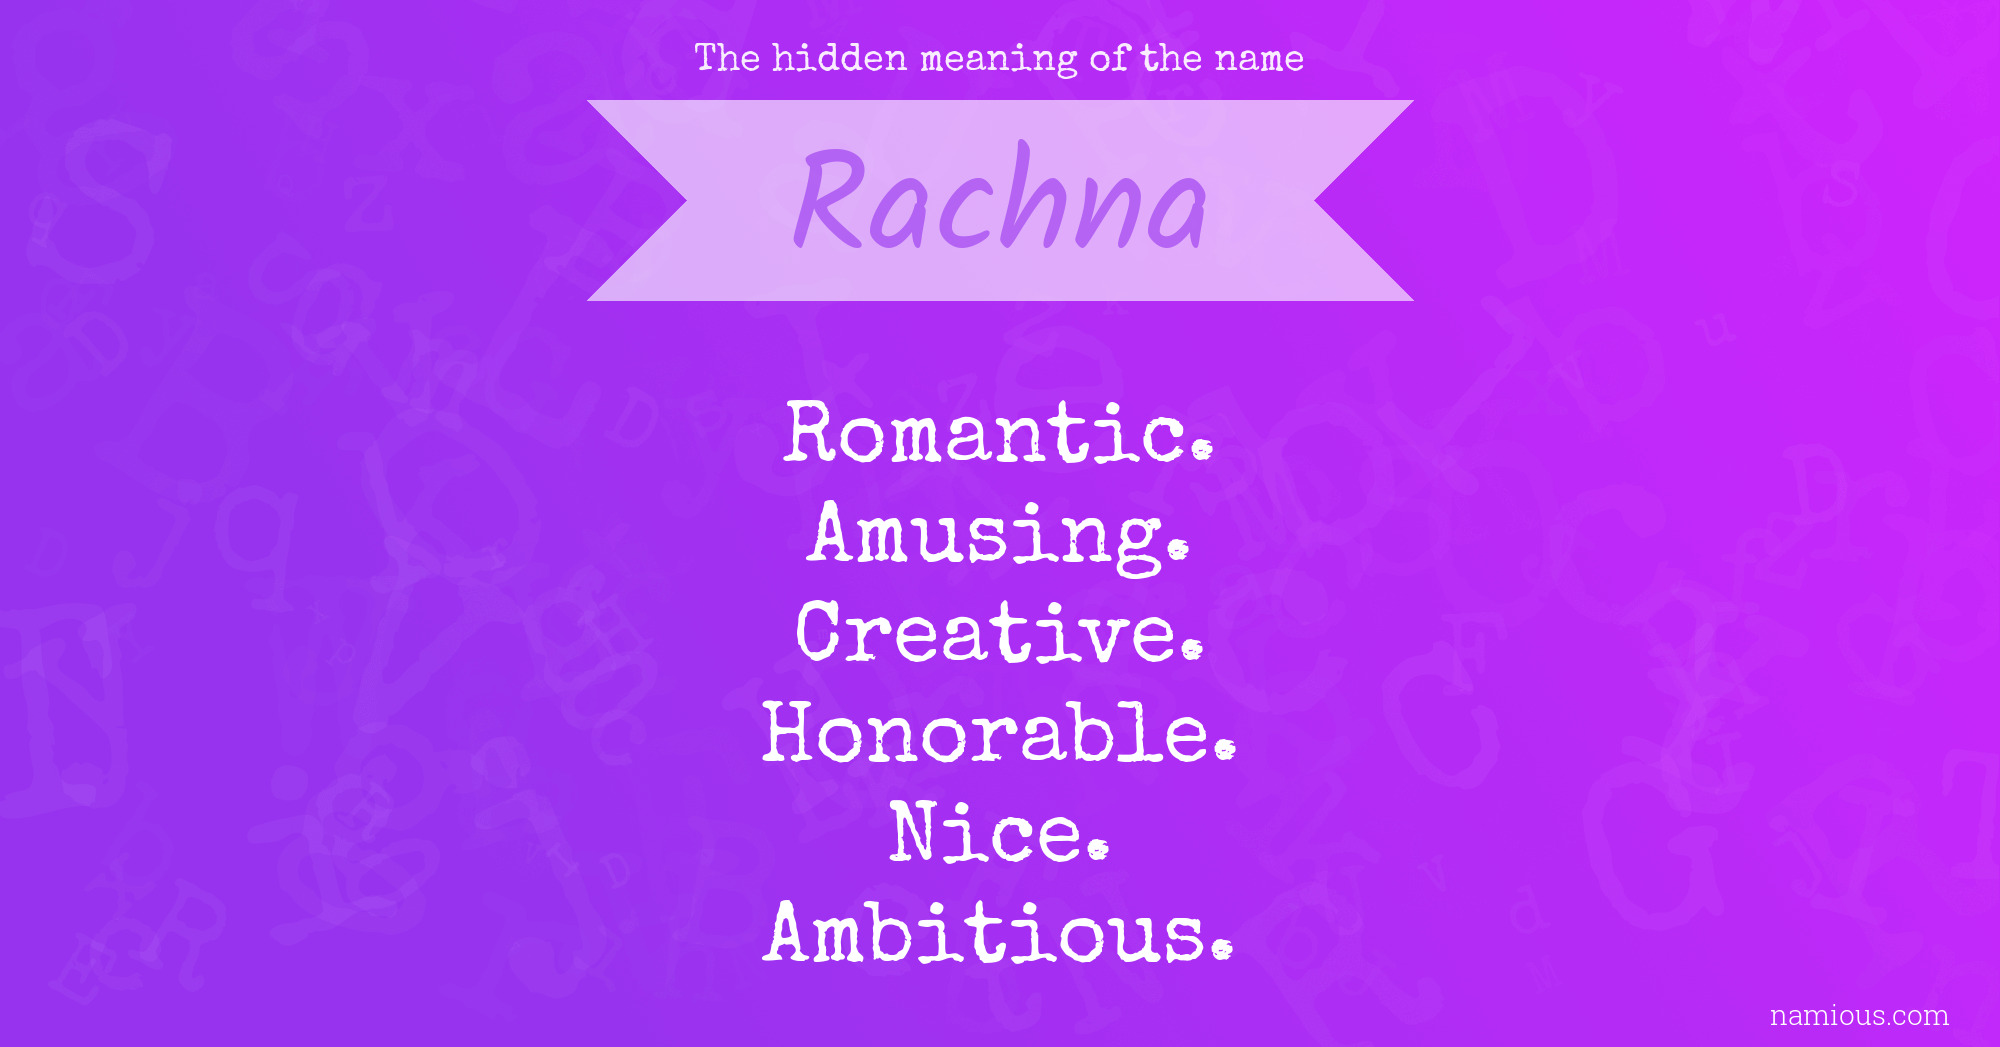 The hidden meaning of the name Rachna